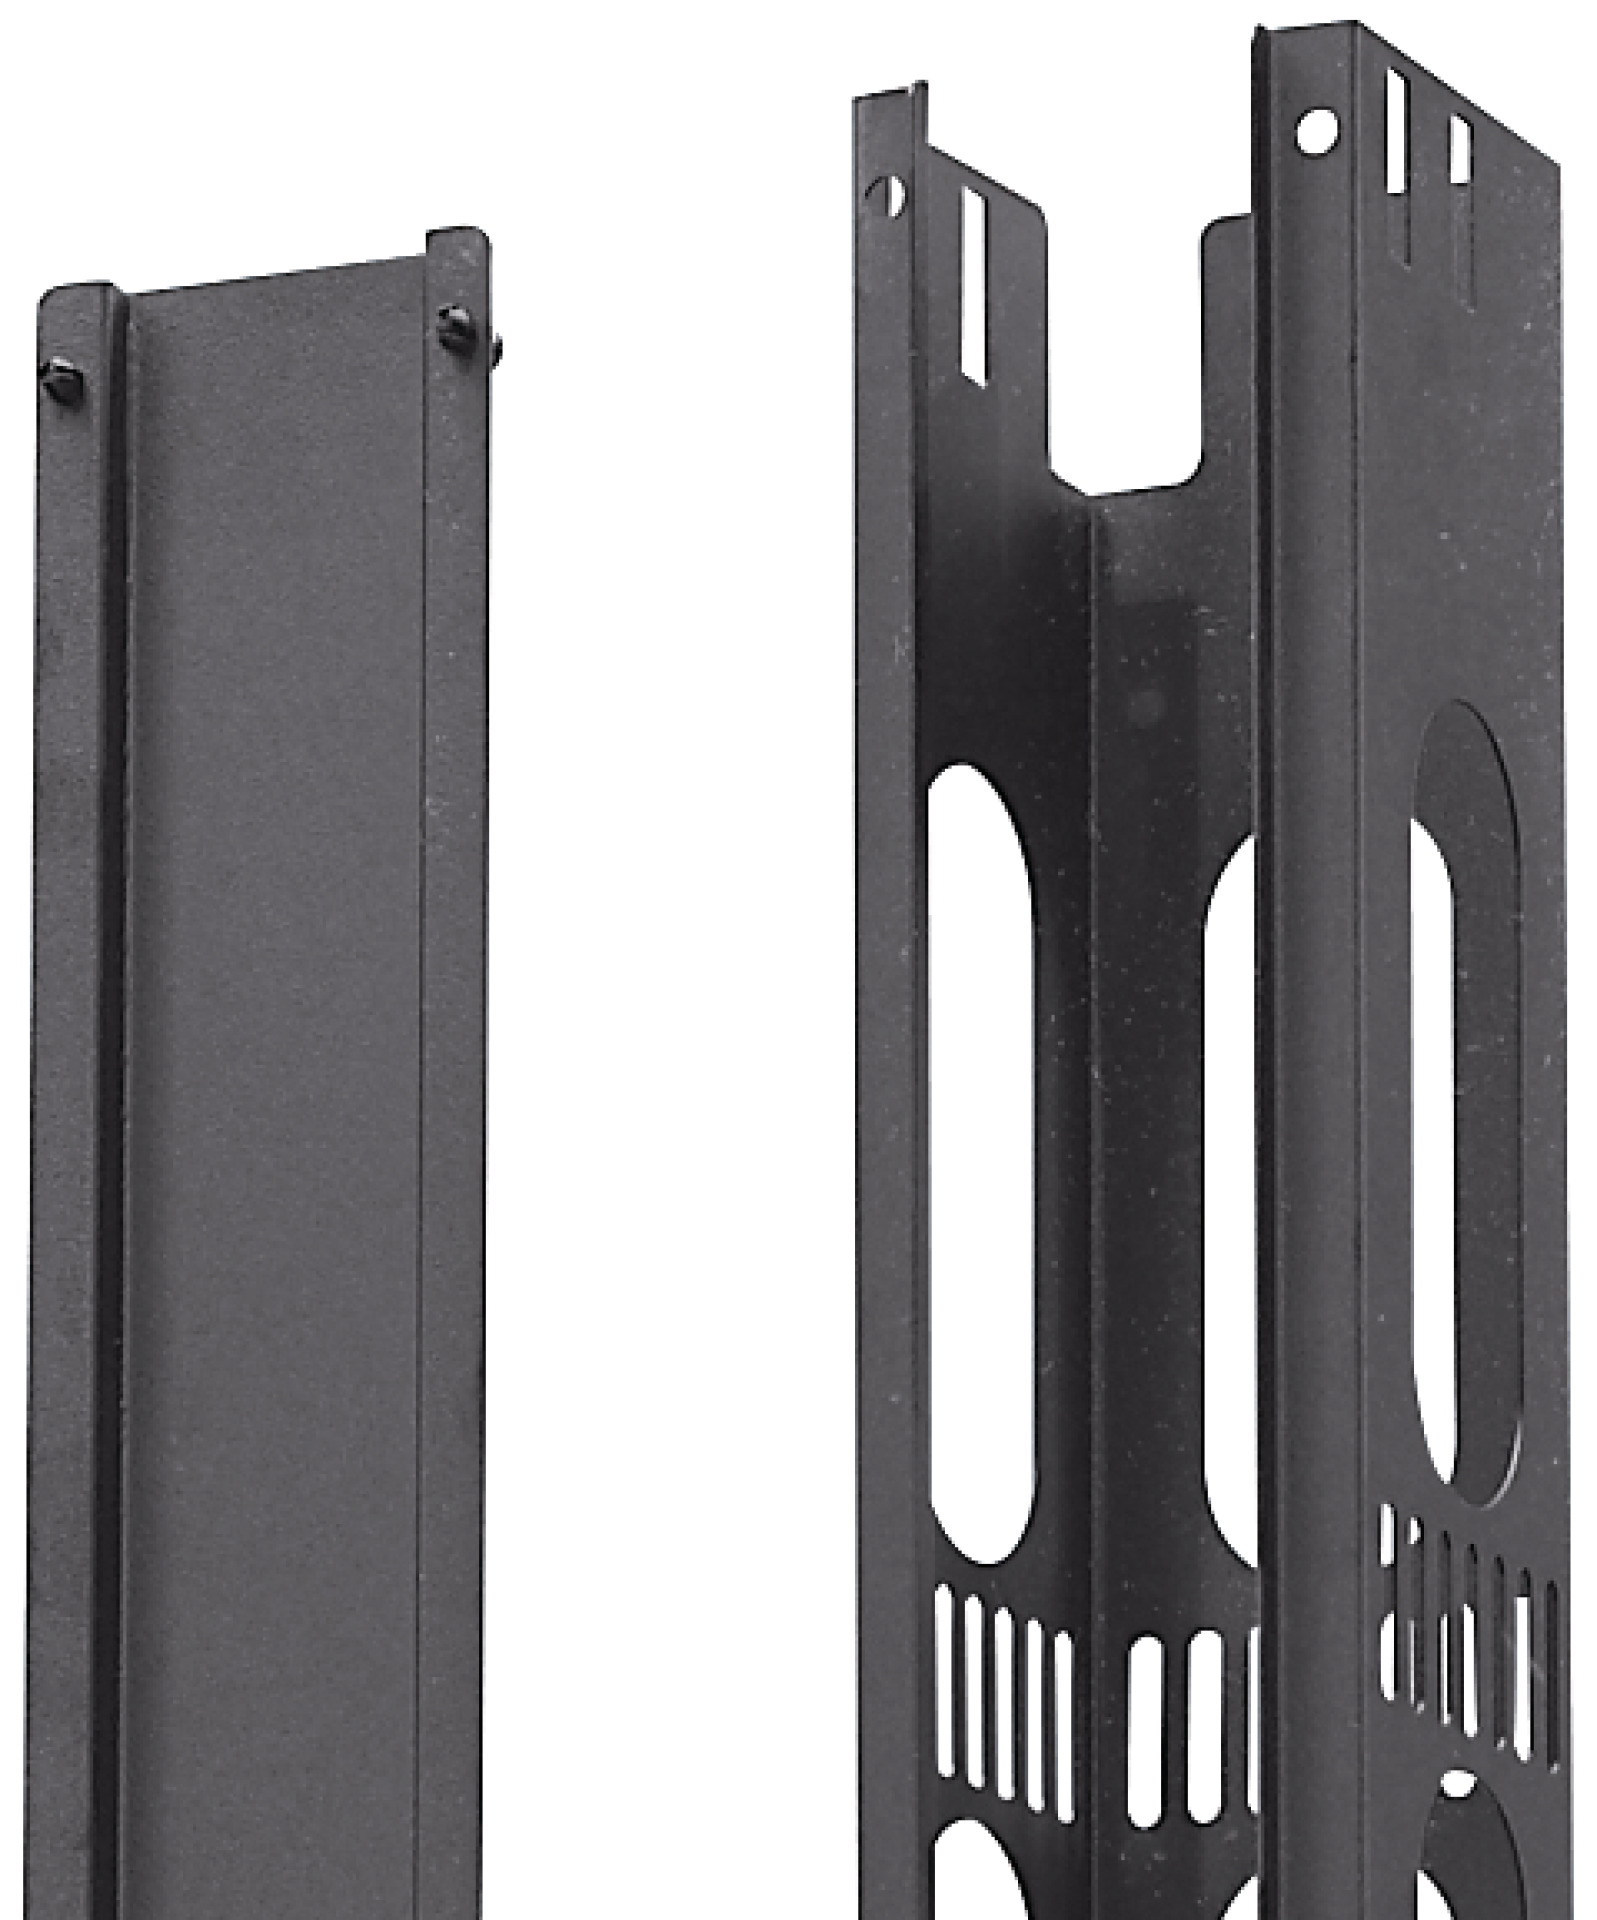 Vertical Cable Management 47U, 1 Piece, RAL9005, for PRO